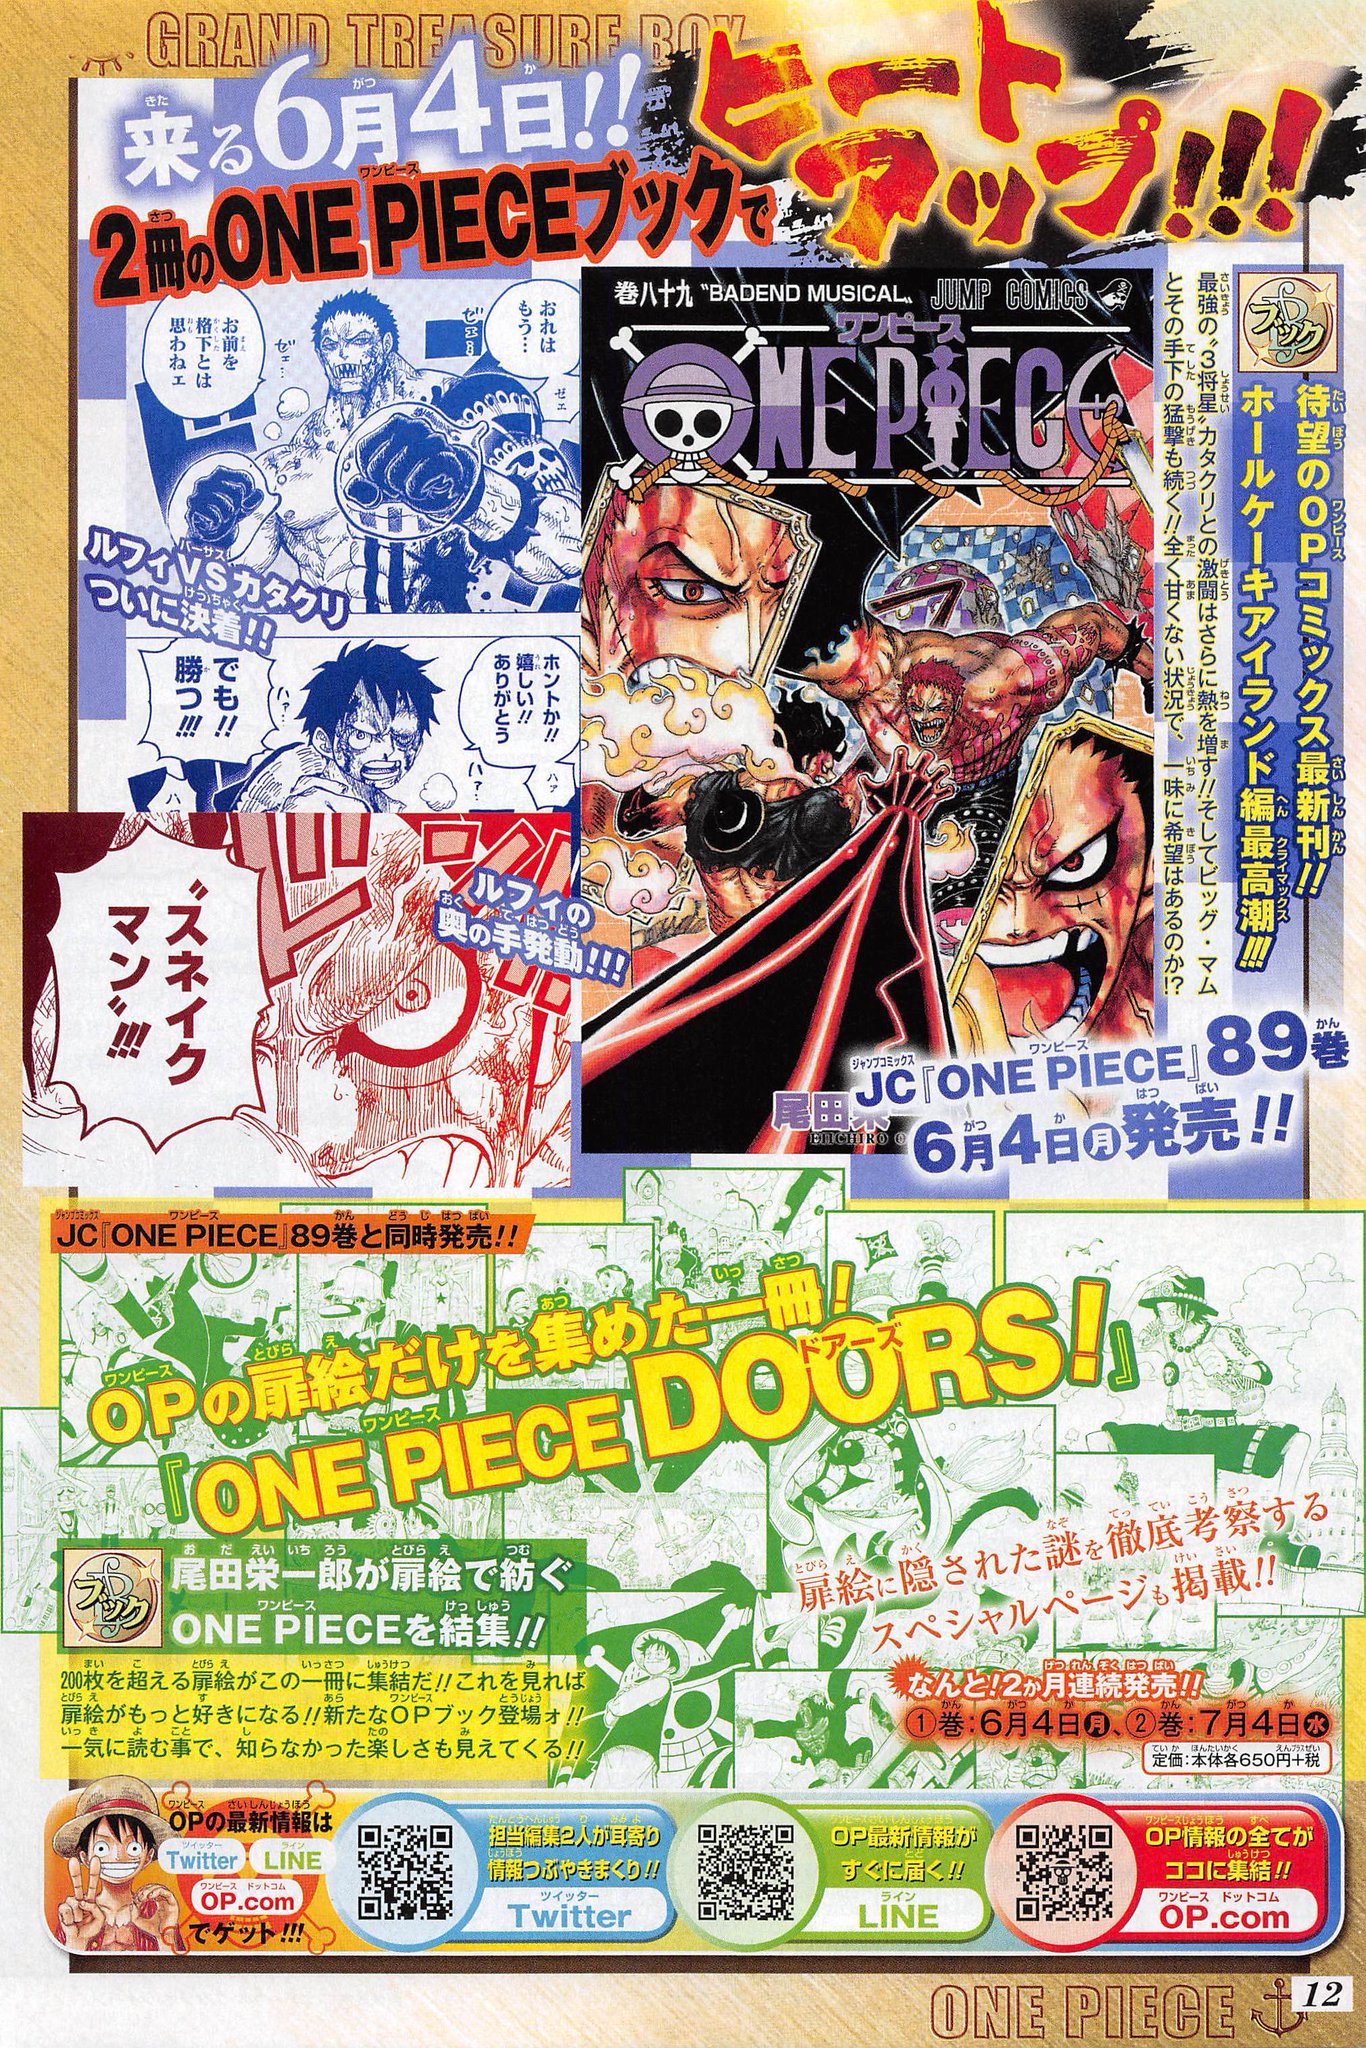 Yonkouproductions One Piece Volume Cover Releases June 4th One Piece Doors Will Be Released In 2 Volumes Featuring A Compilation Of The Cover Story Series From The Manga On June 4th And July 4th Respectively T Co 6d2zrjpsrh